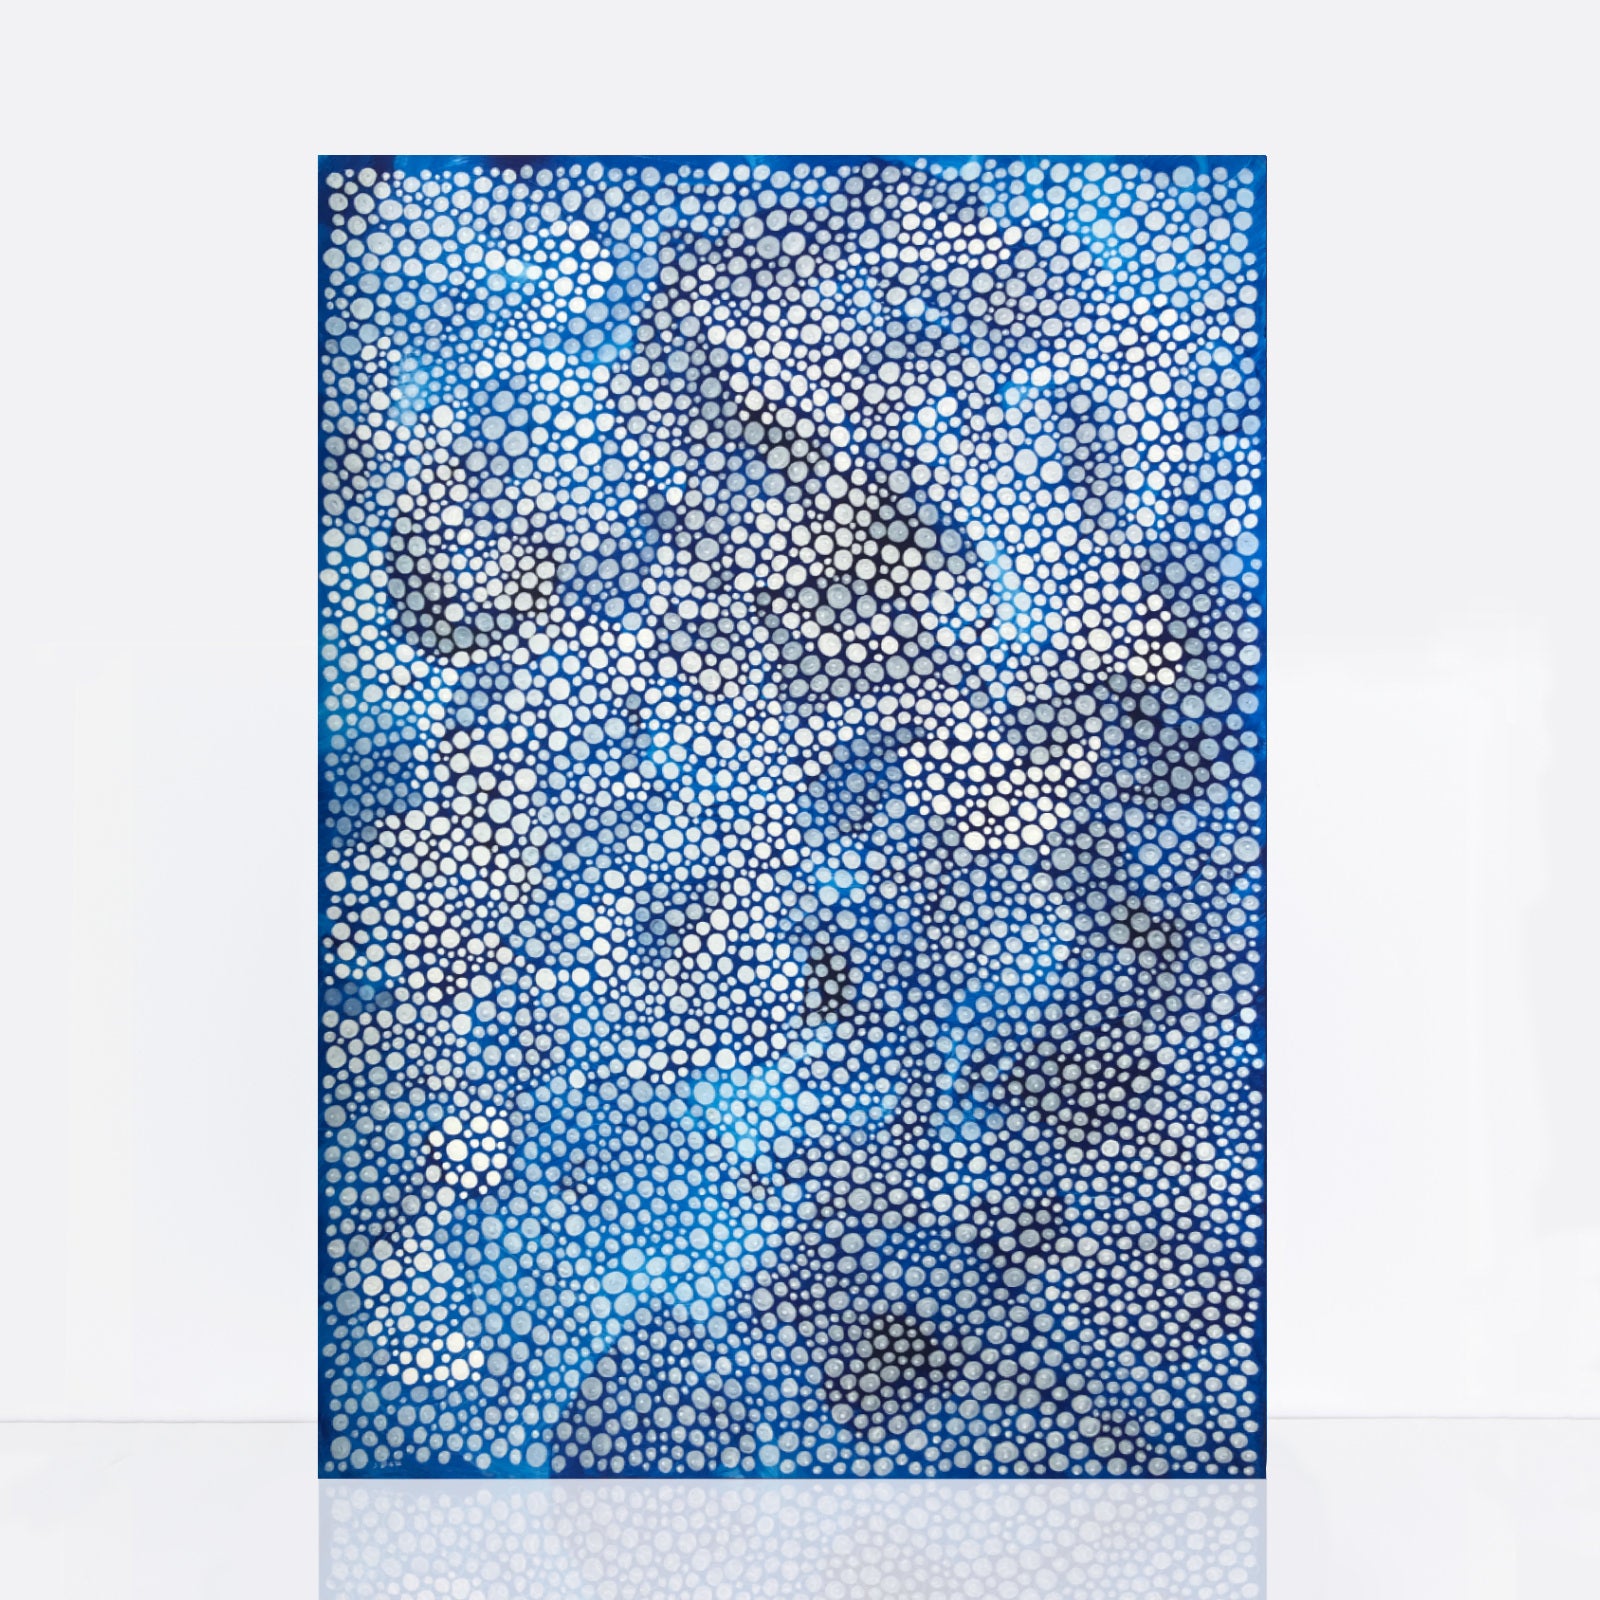 vivid blue artwork adorned with intricate white dots of various sizes, reminiscent of sea bubbles and foam